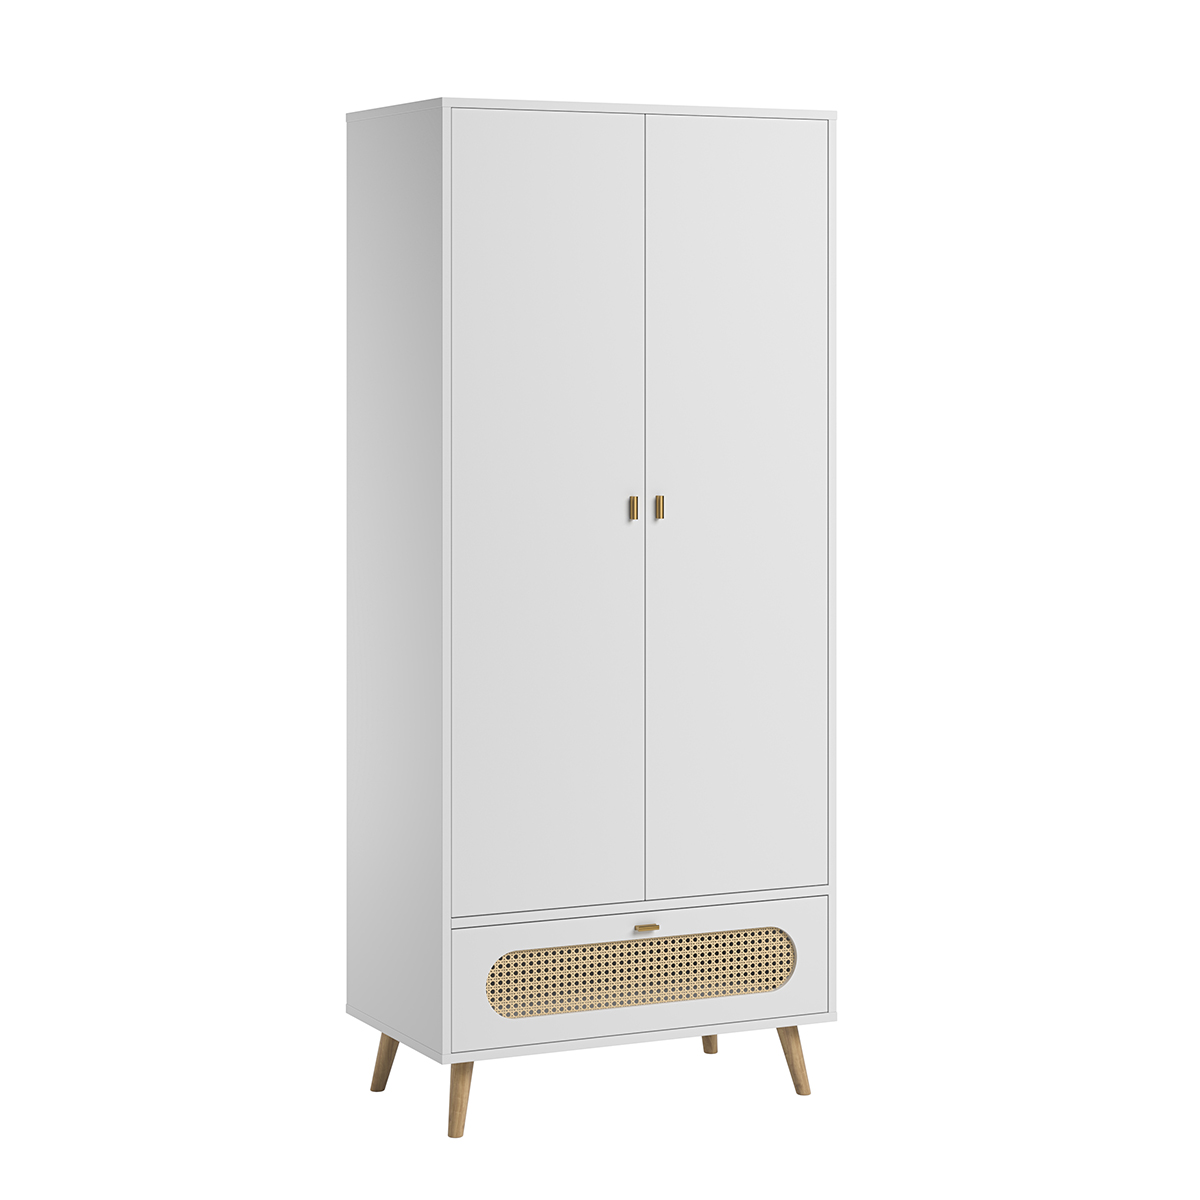 6050124_vox_canne_chambre_bebe_armoire_1